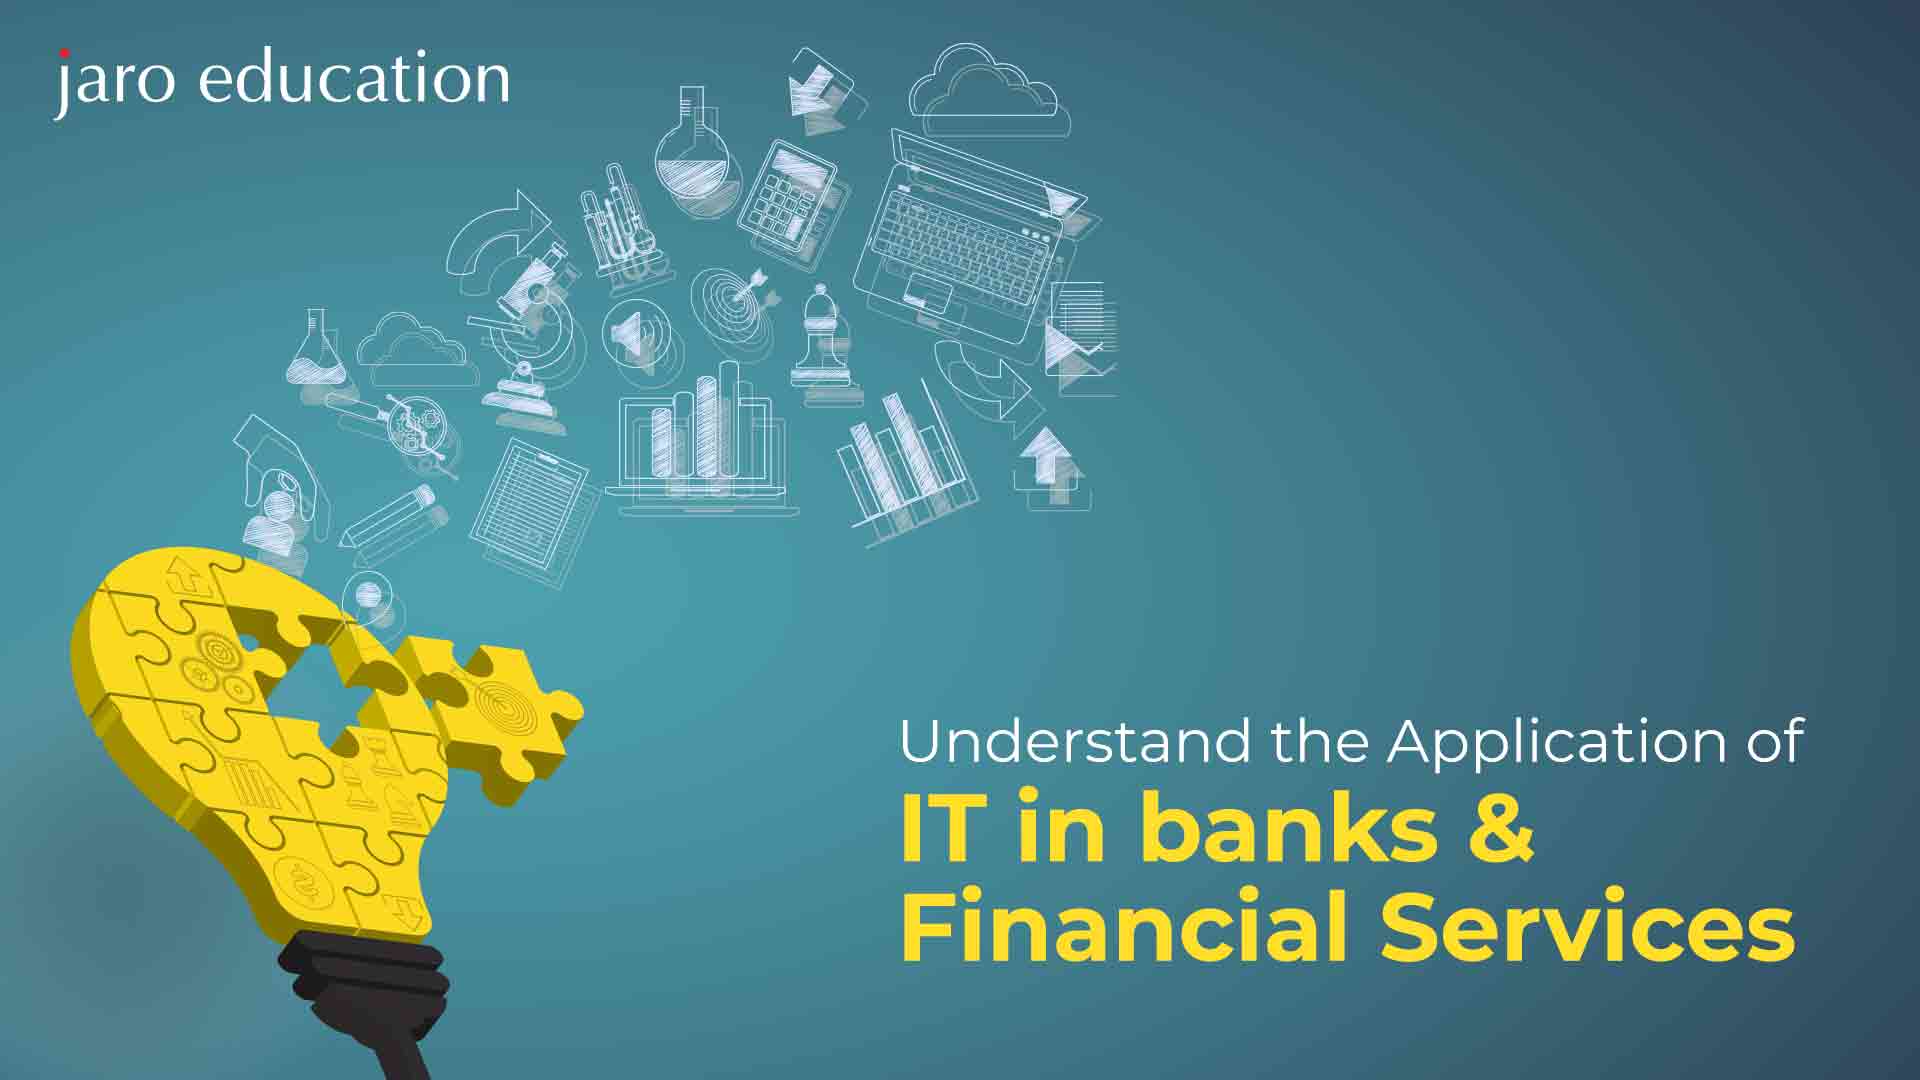 Understand-the-Application-of-IT-in-banks-&-Financial-Services